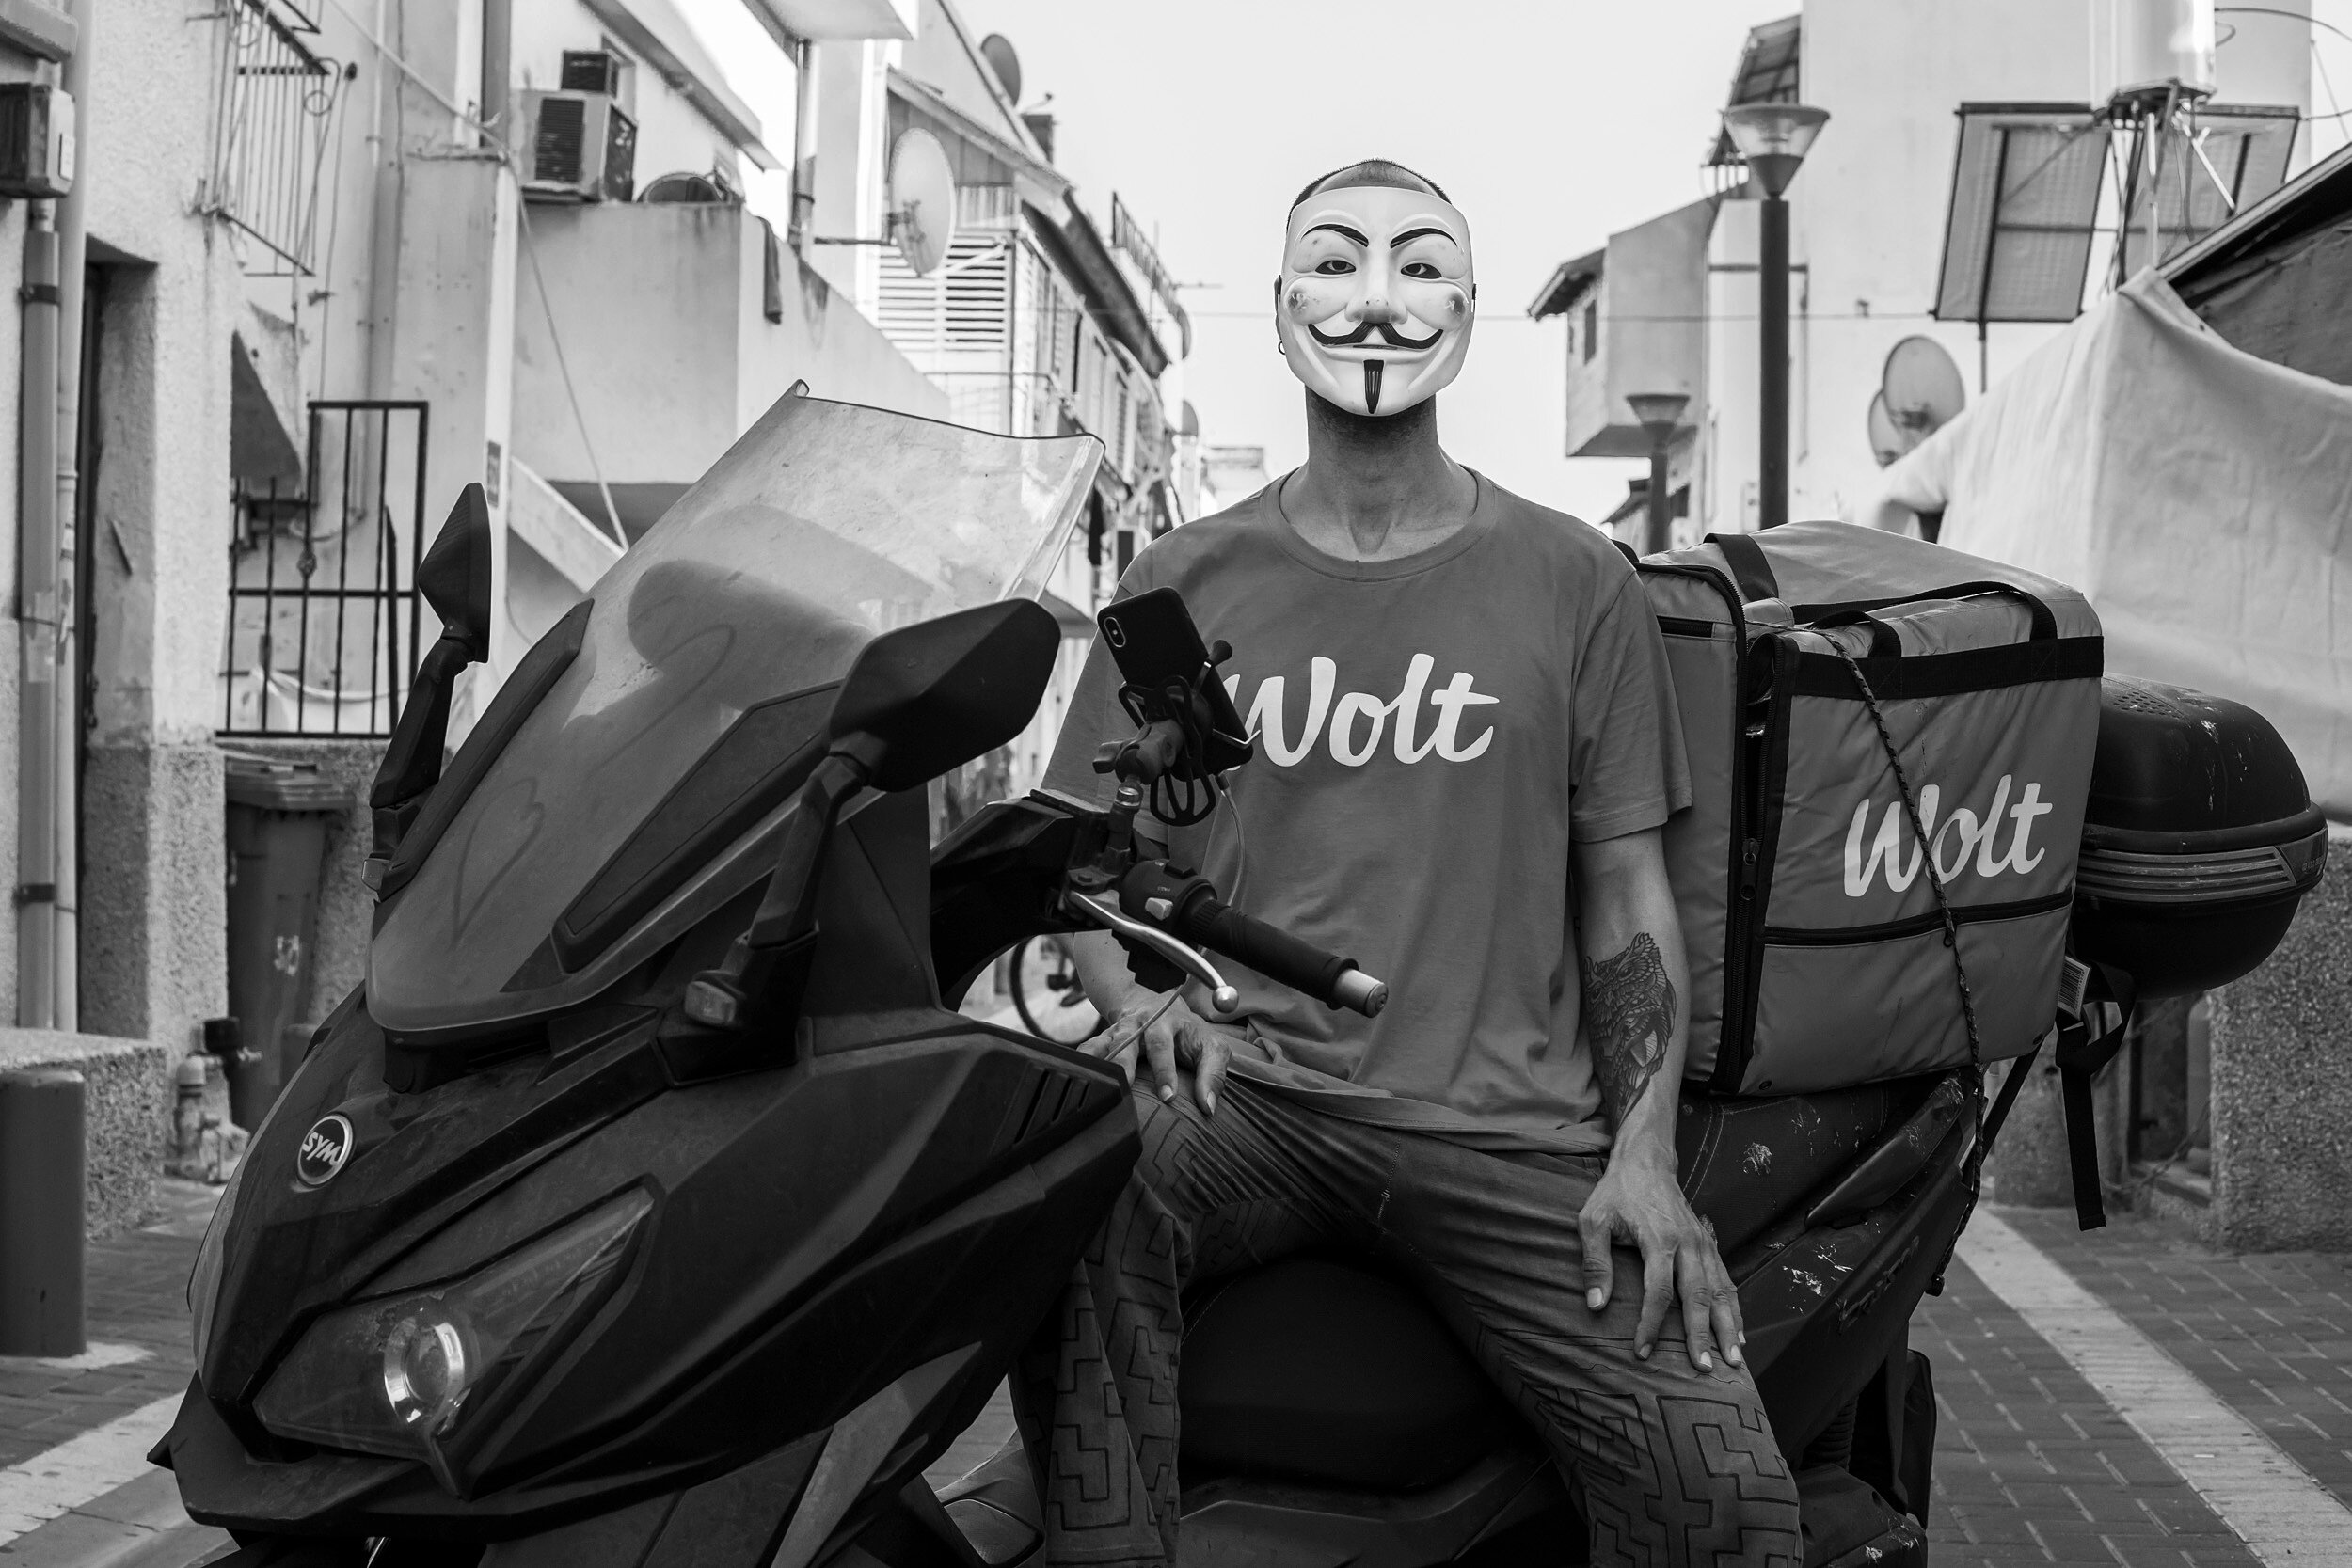 Joseph drives around with the Guy Fawkes mask regularly during his job as a food volunteer. This is his way of protesting and being identified among the social activist  